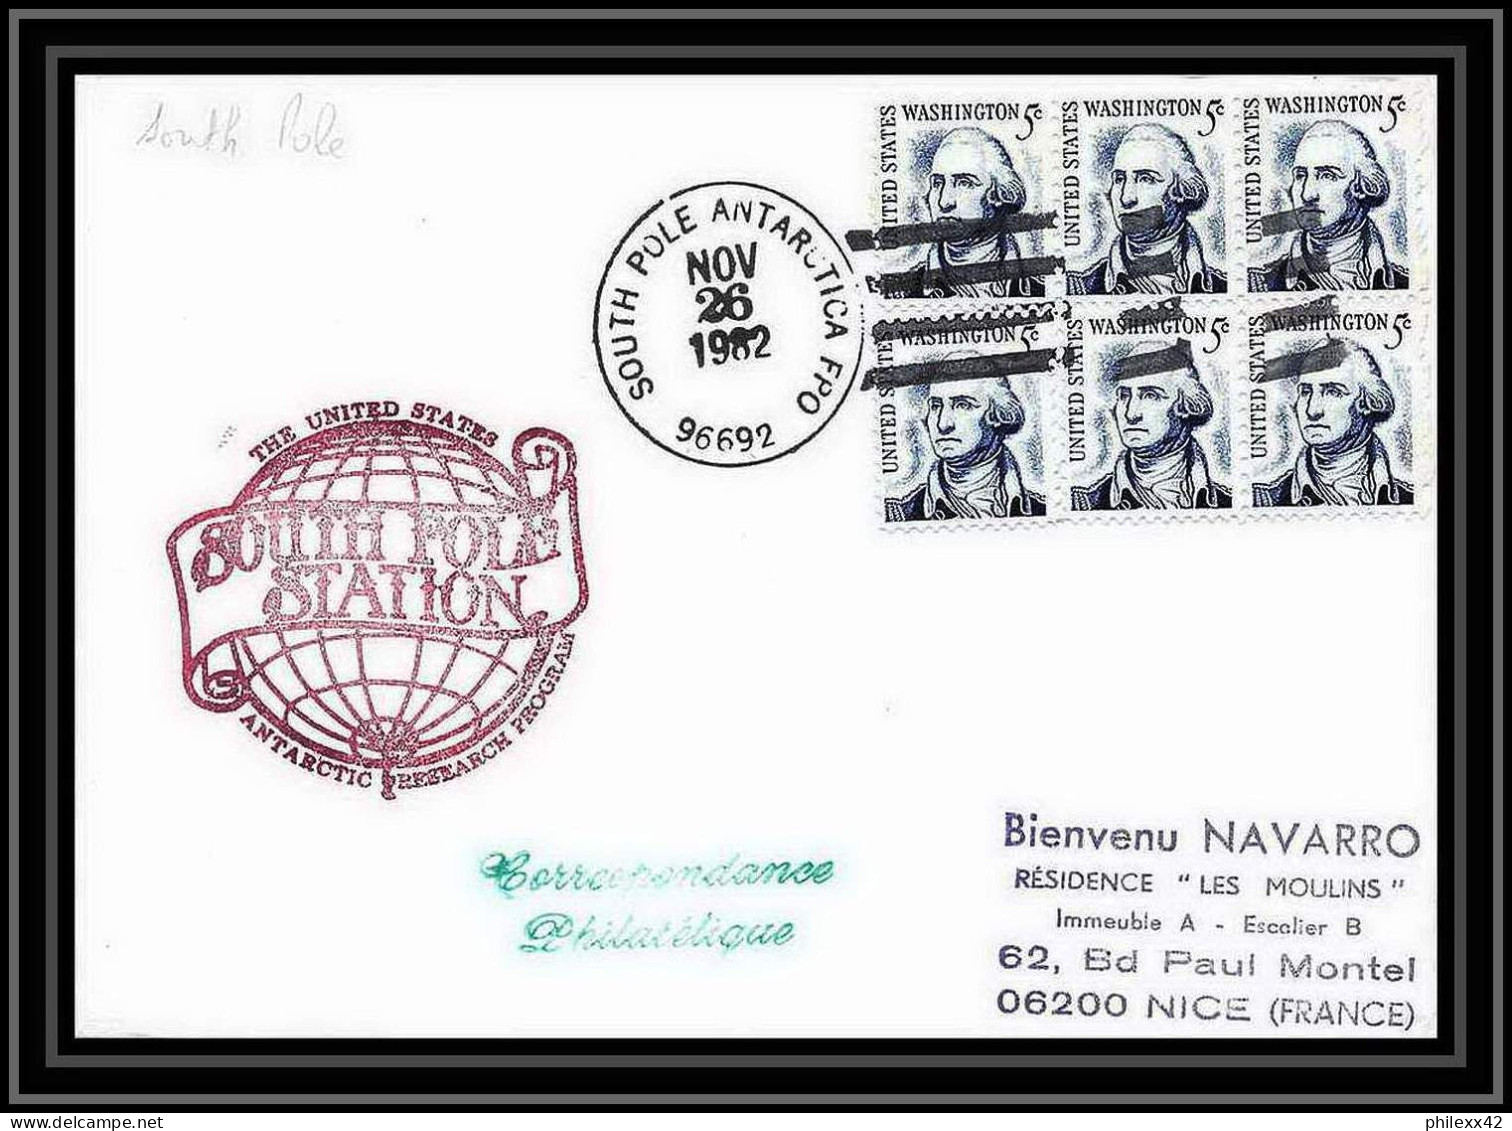 1993 Antarctic USA Lettre (cover) South Pole Station 26/11/1982 - Scientific Stations & Arctic Drifting Stations